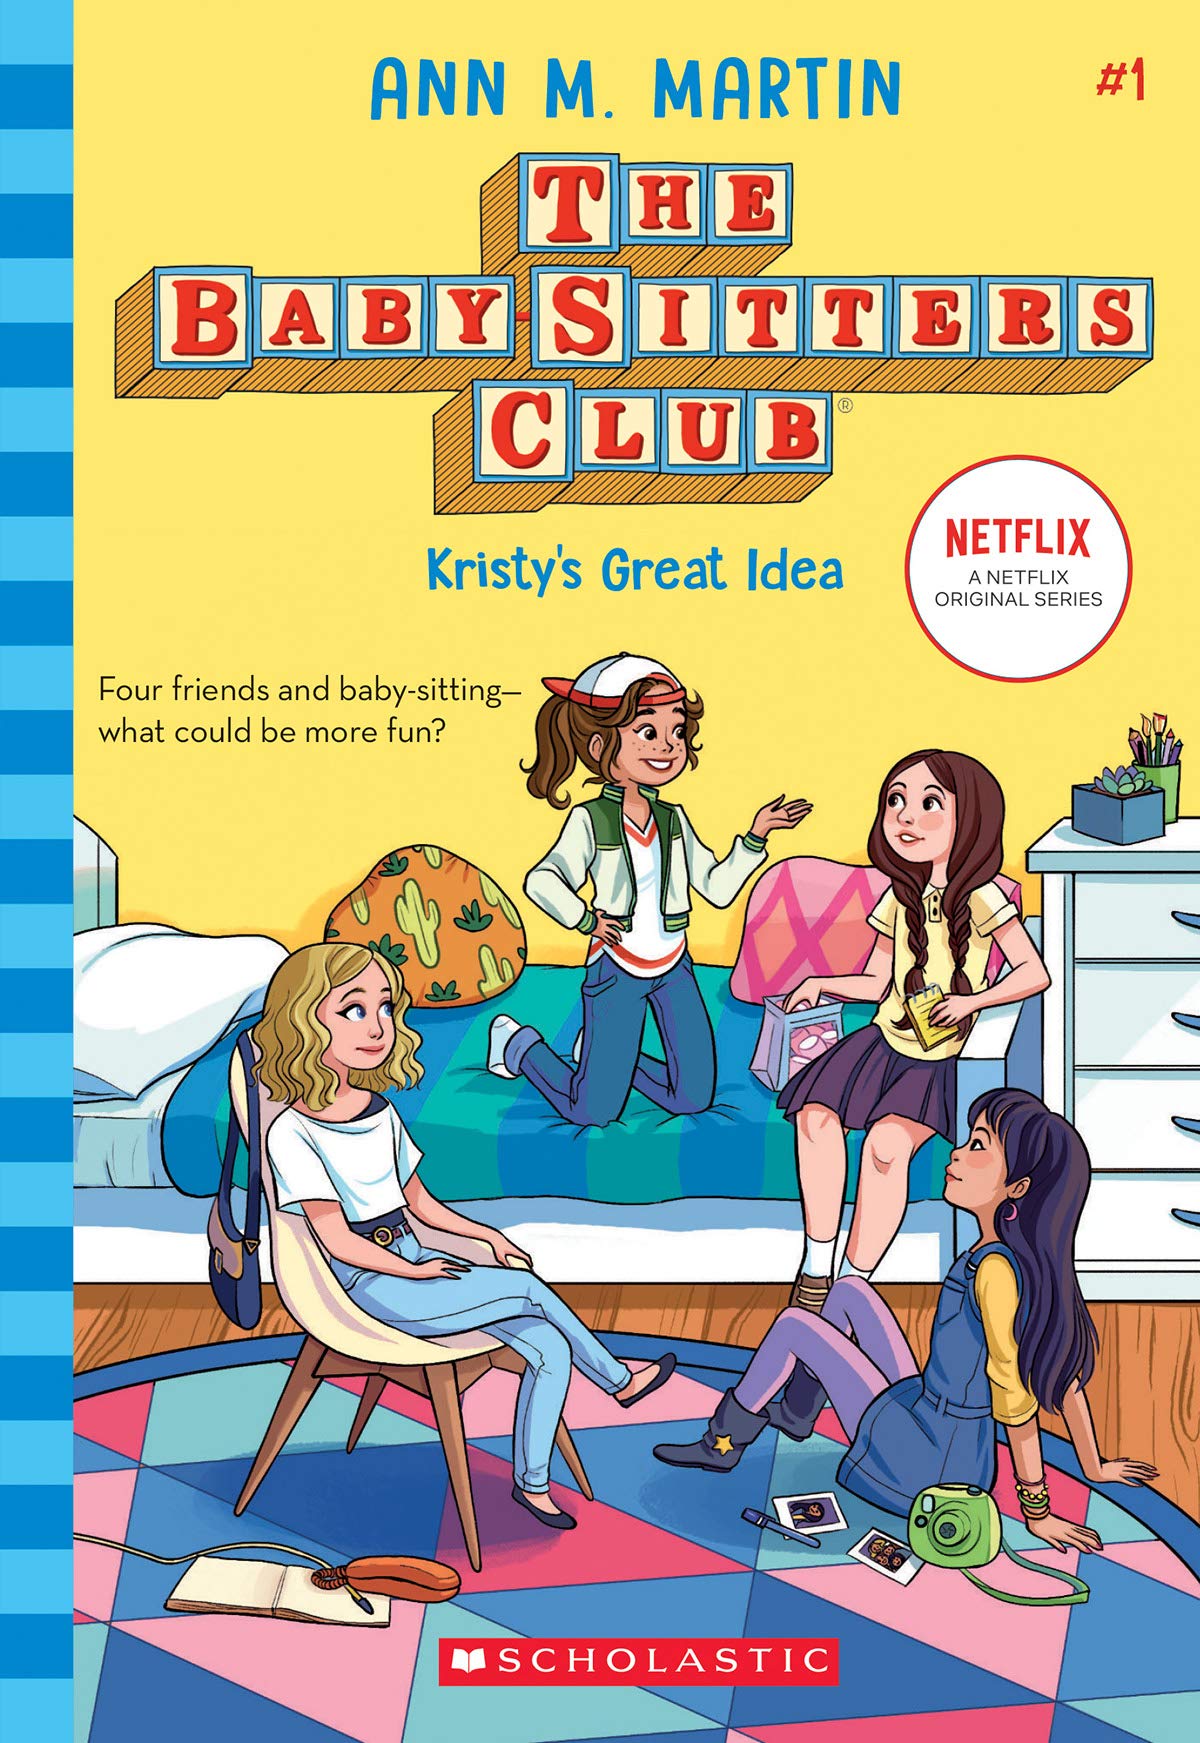 Stacey's Mistake: A Graphic Novel (The Baby-Sitters Club #14) (The  Baby-Sitters Club Graphix)